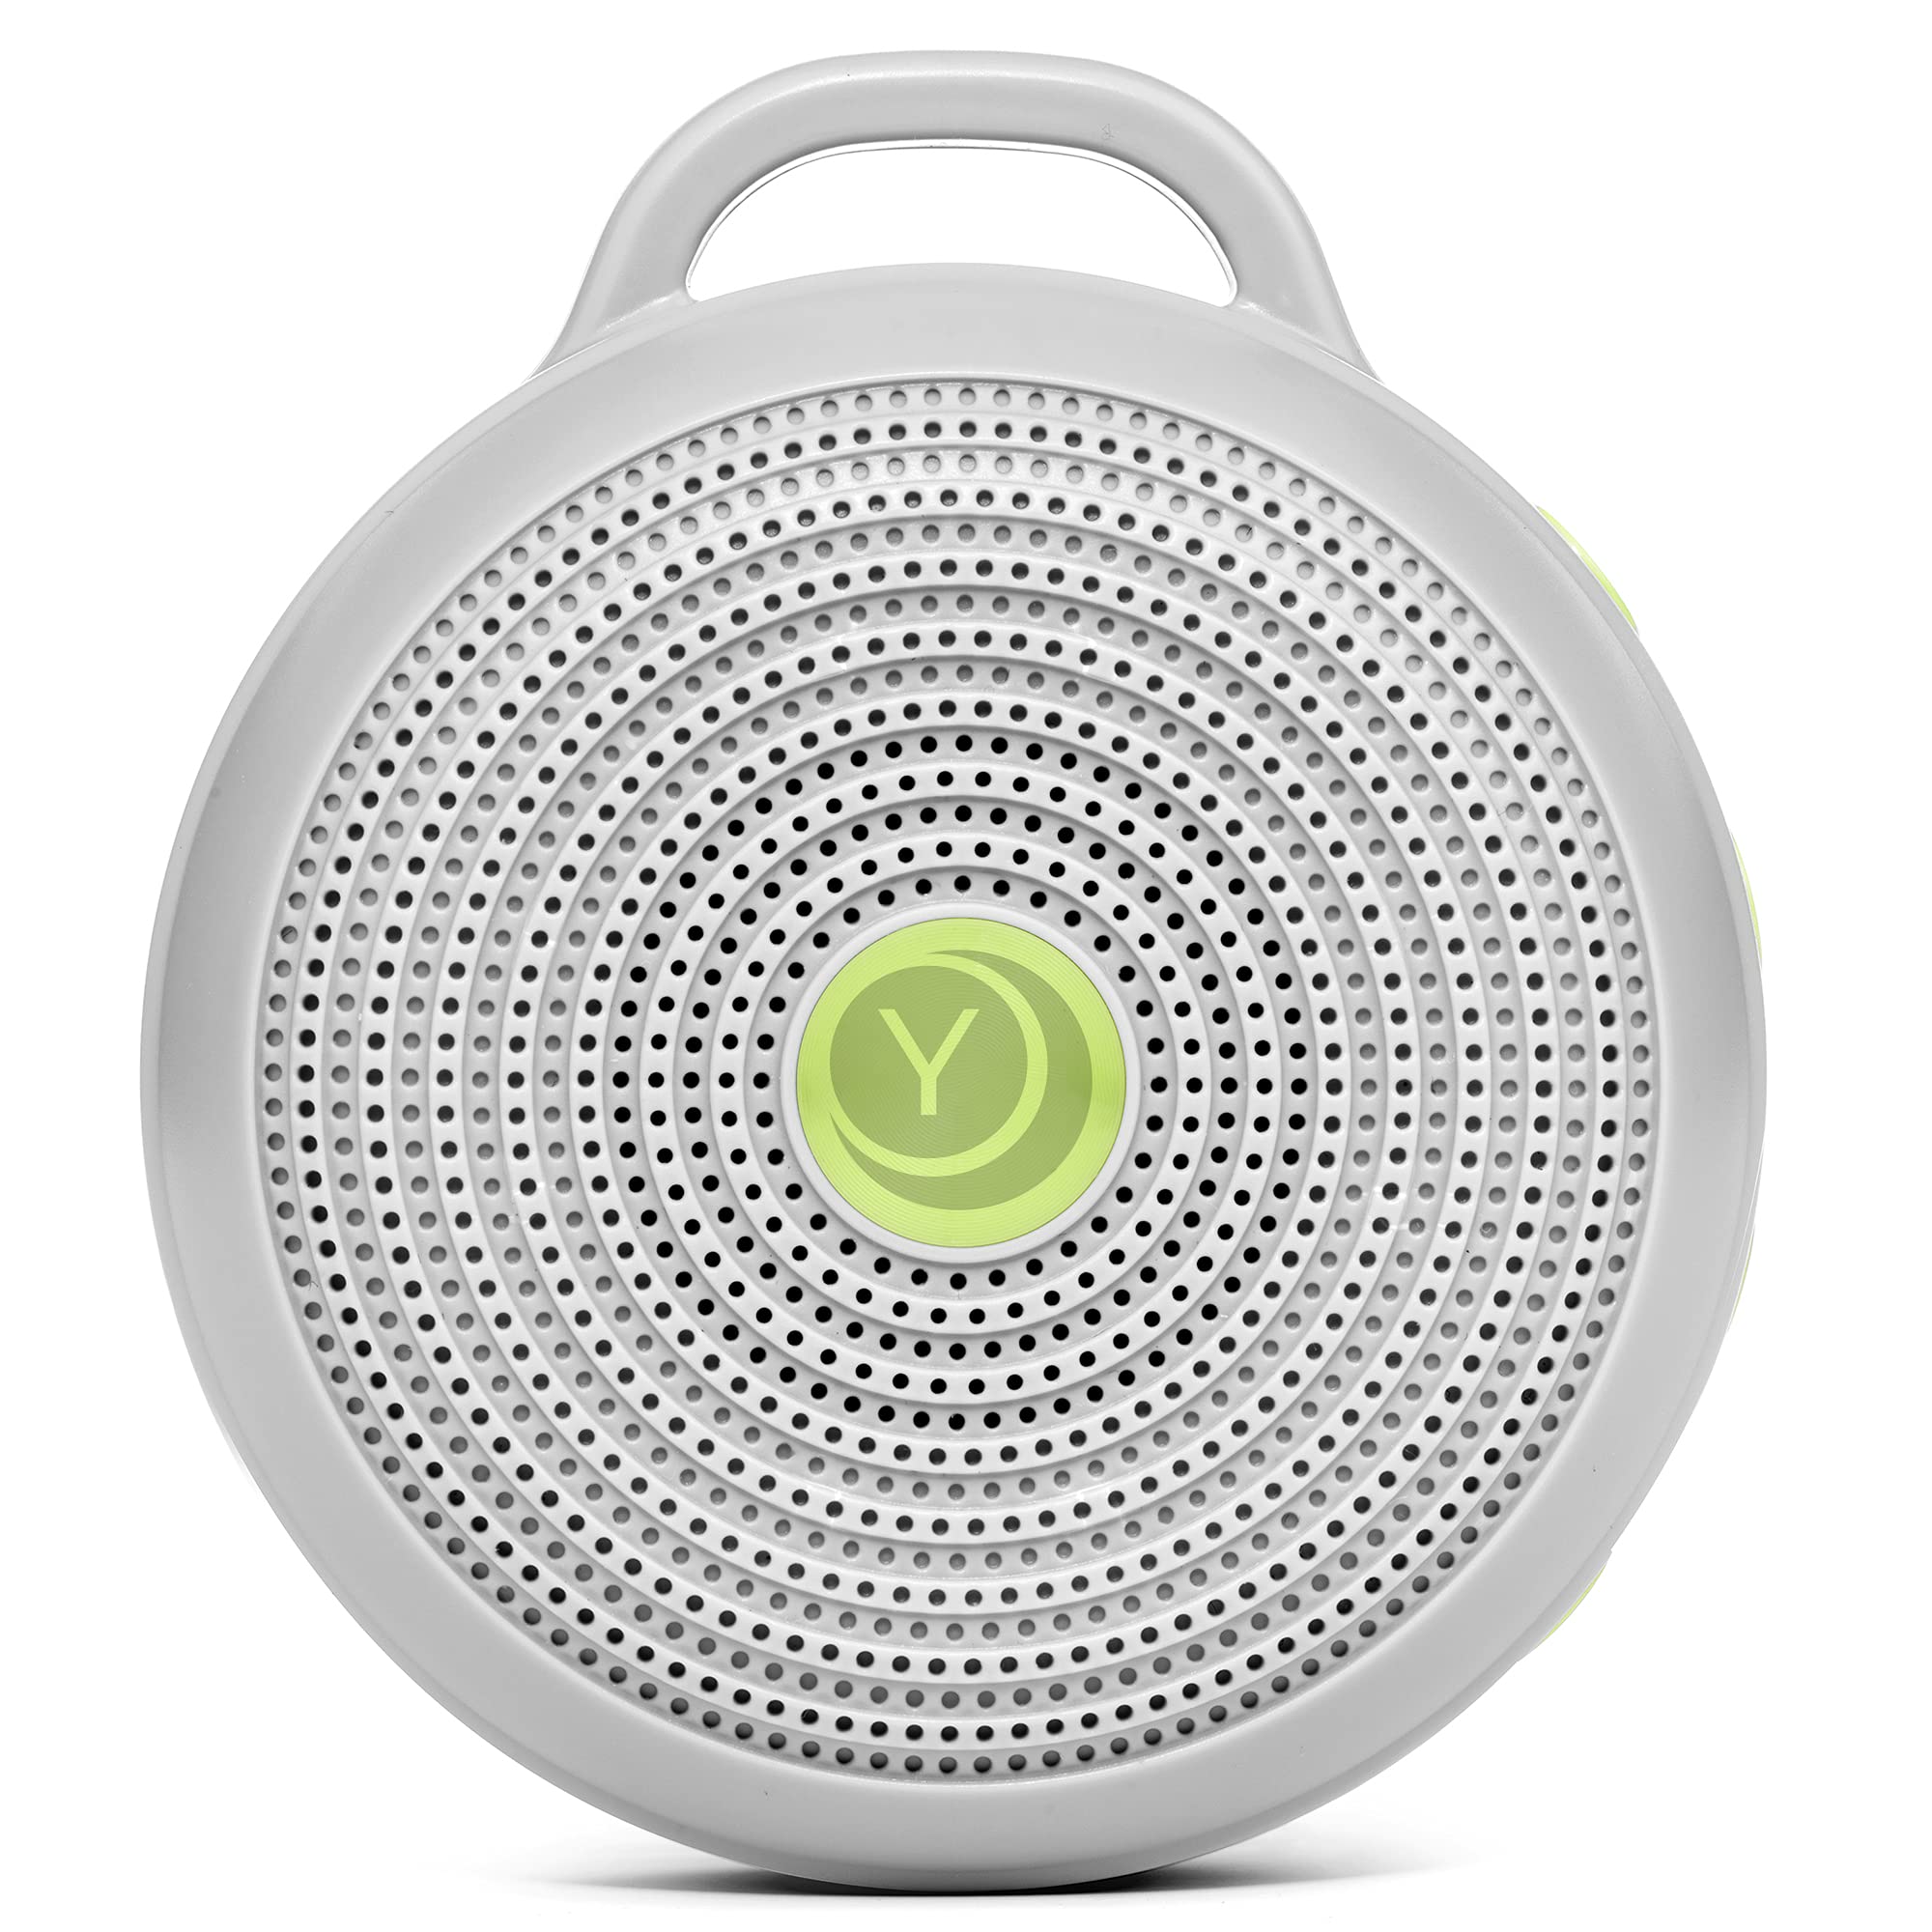 Portable white noise machine with a gray color